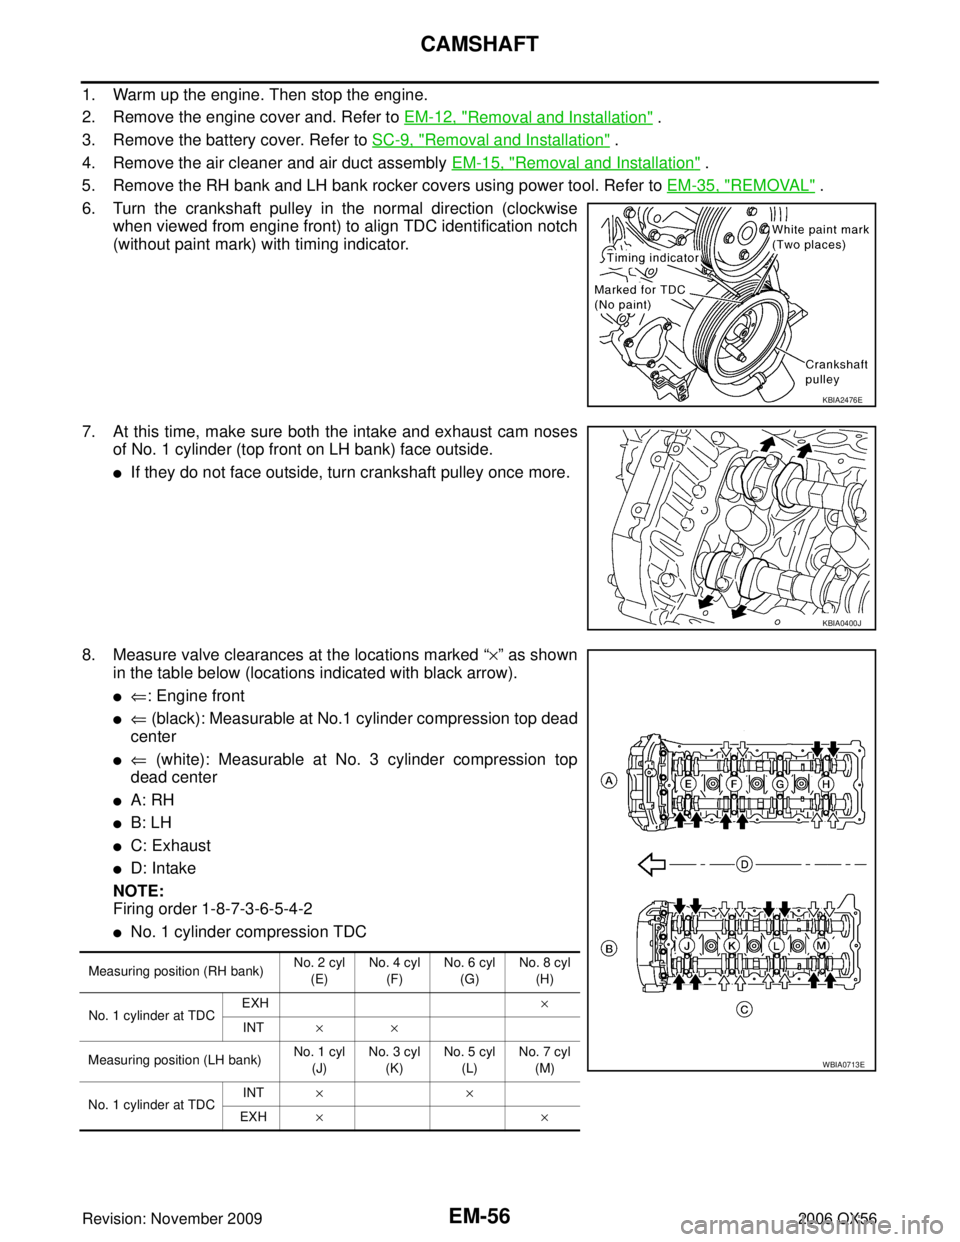 INFINITI QX56 2006  Factory Service Manual EM-56Revision: November 2009
CAMSHAFT
2006 QX56
1. Warm up the engine. Then stop the engine.
2. Remove the engine cover and. Refer to EM-12, "
Removal and Installation" .
3. Remove the battery cover. 